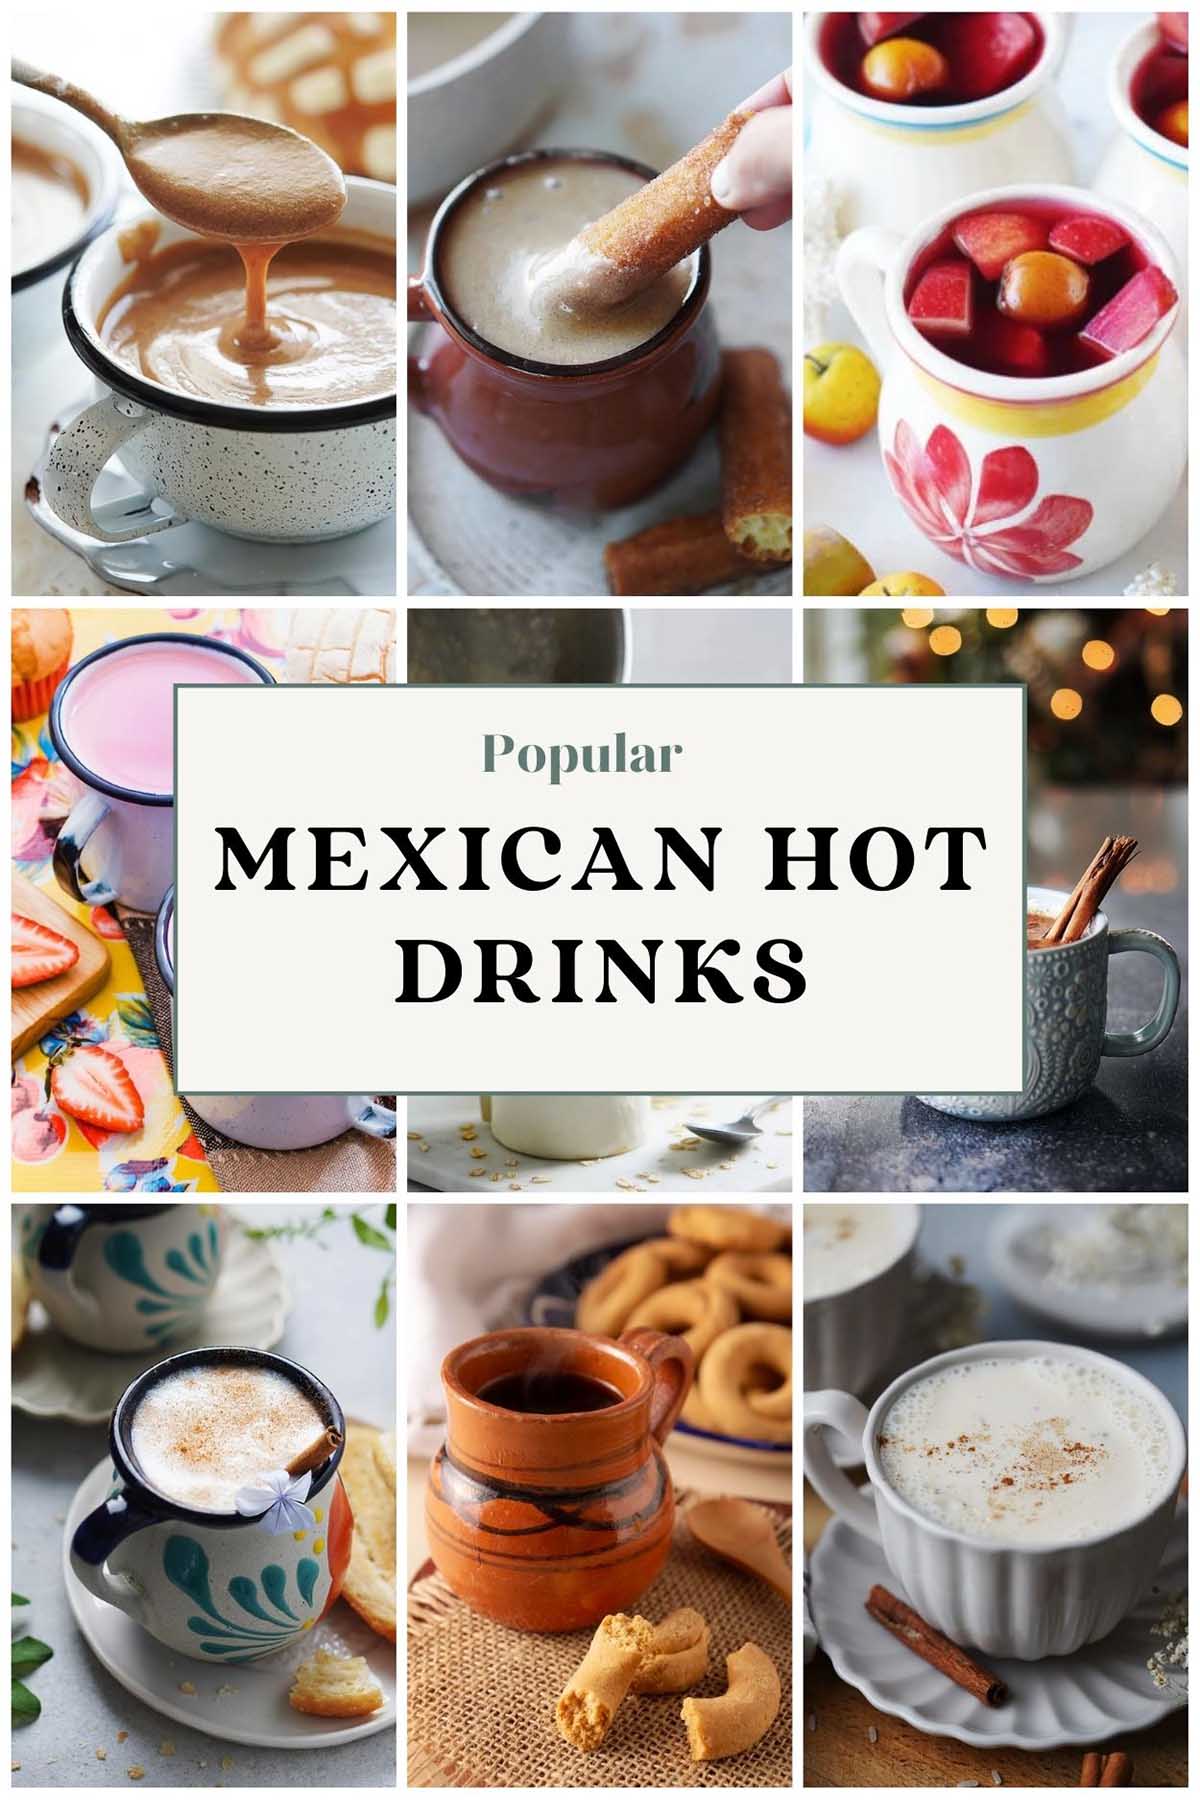 A roundup collage of Mexican Hot Drinks.